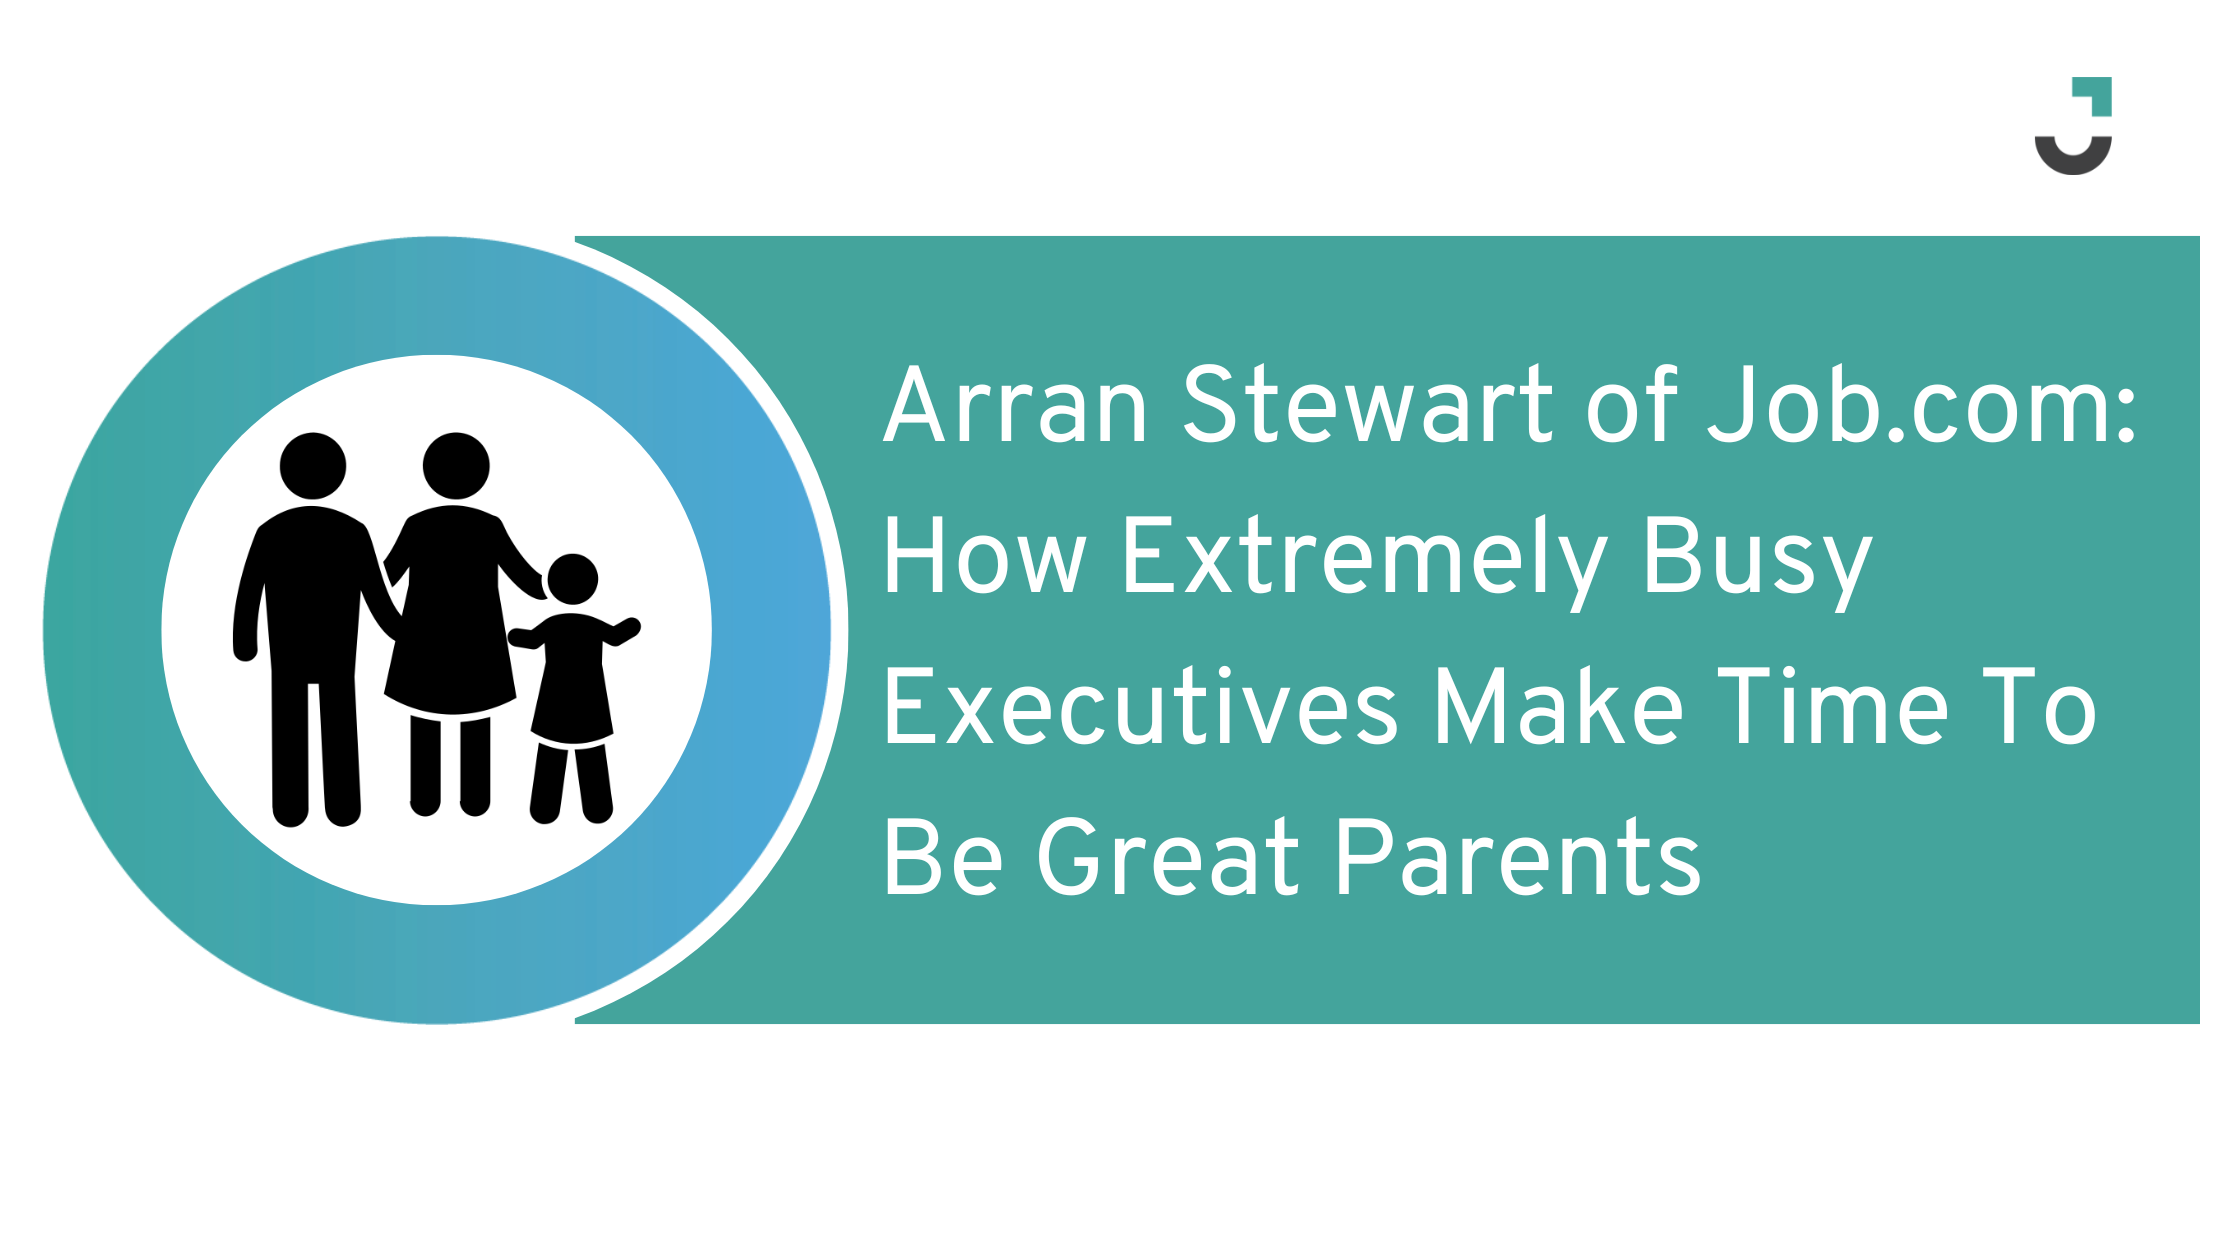 Arran Stewart of Job.com: How Extremely Busy Executives Make Time To Be Great Parents